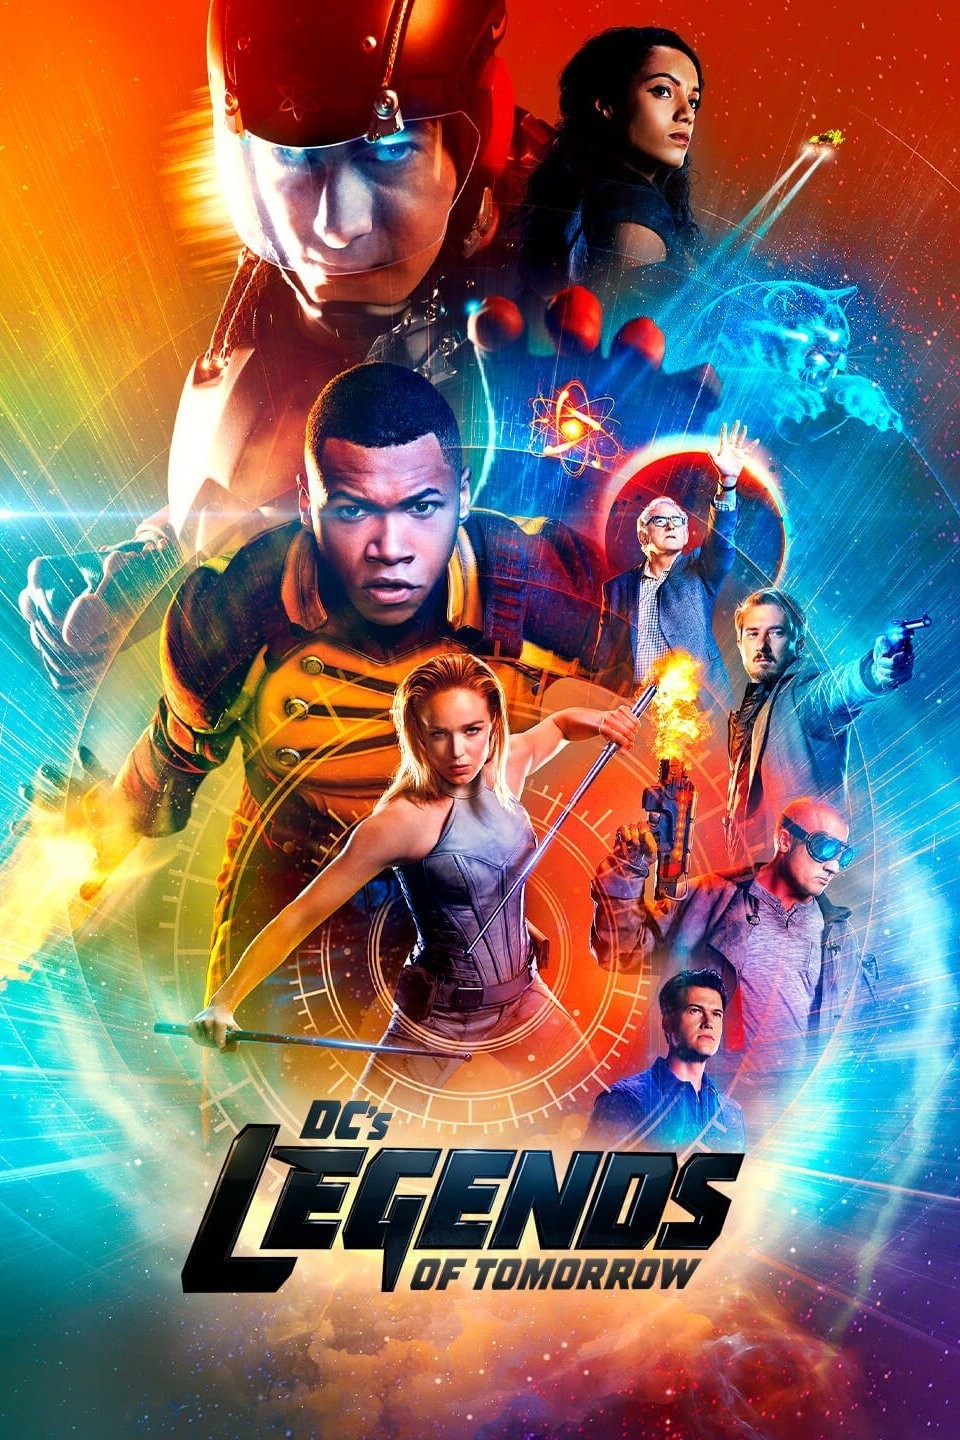 Legends Of Tomorrow Season 6 Release Date, Cast And Plot - What We Know So  Far